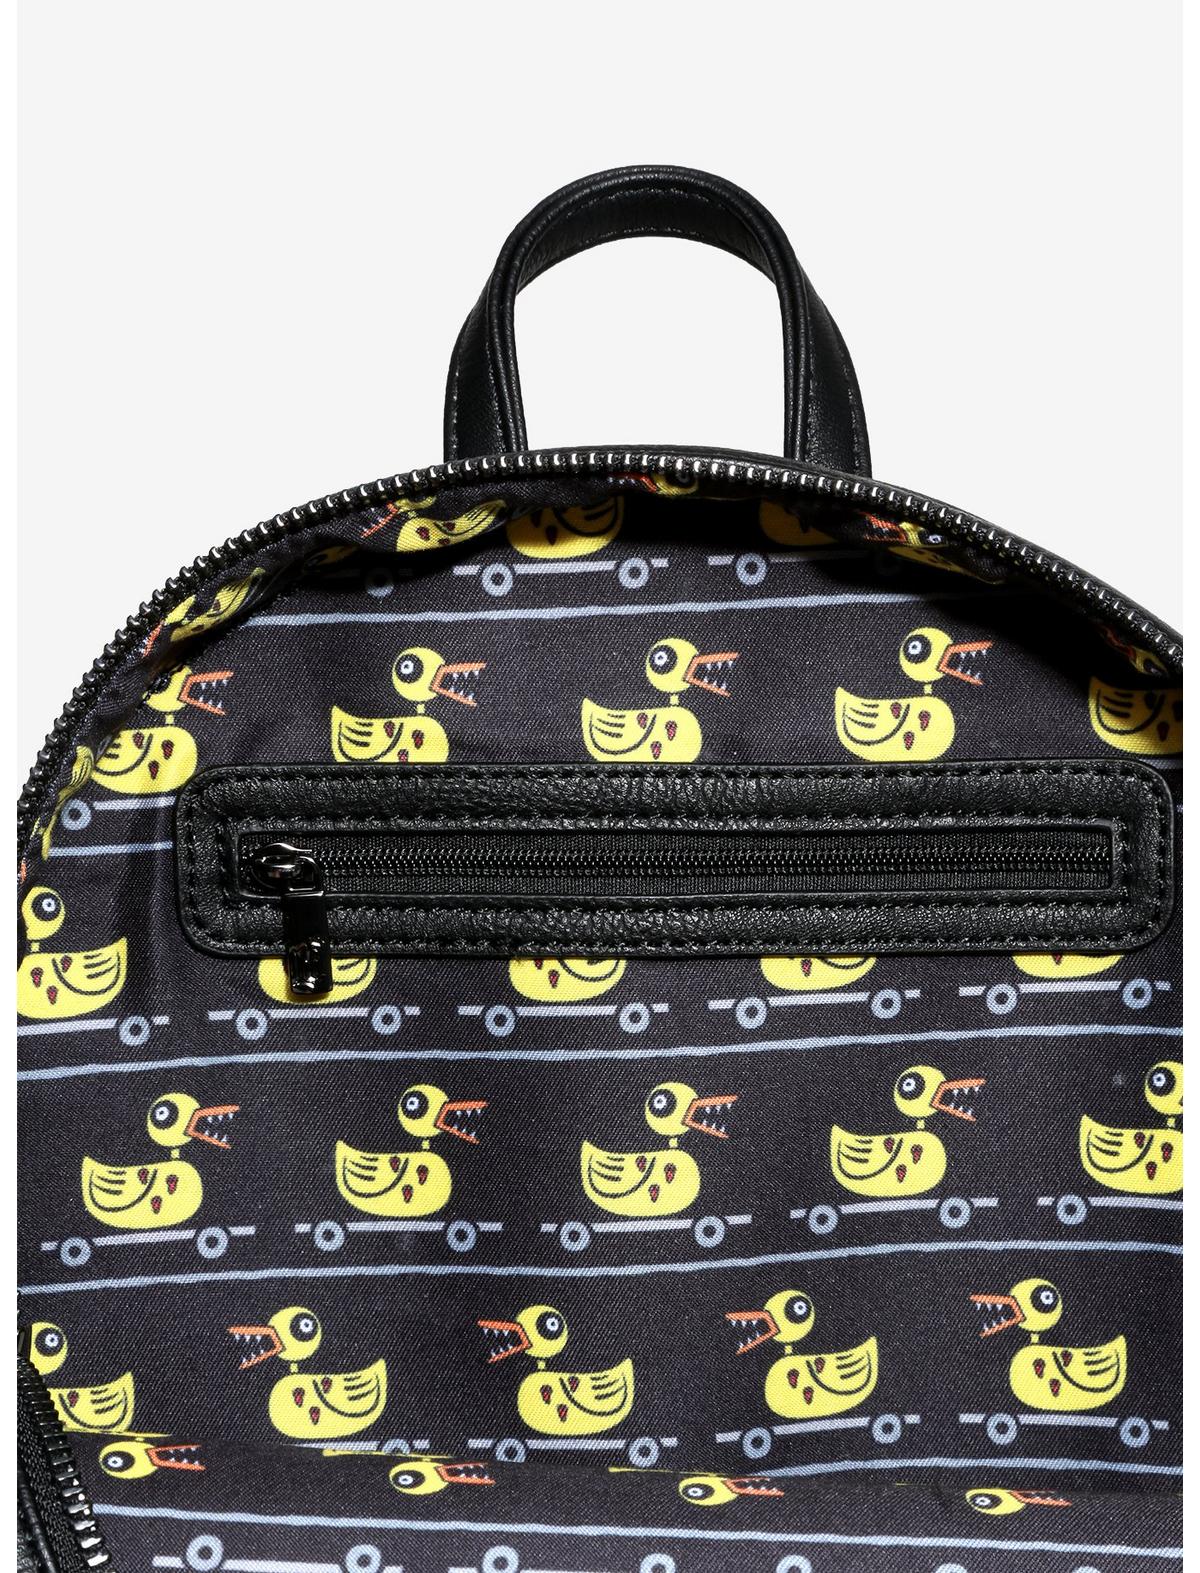 Nightmare Before Christmas Scary Vampire Teddy LoungeFly Bag